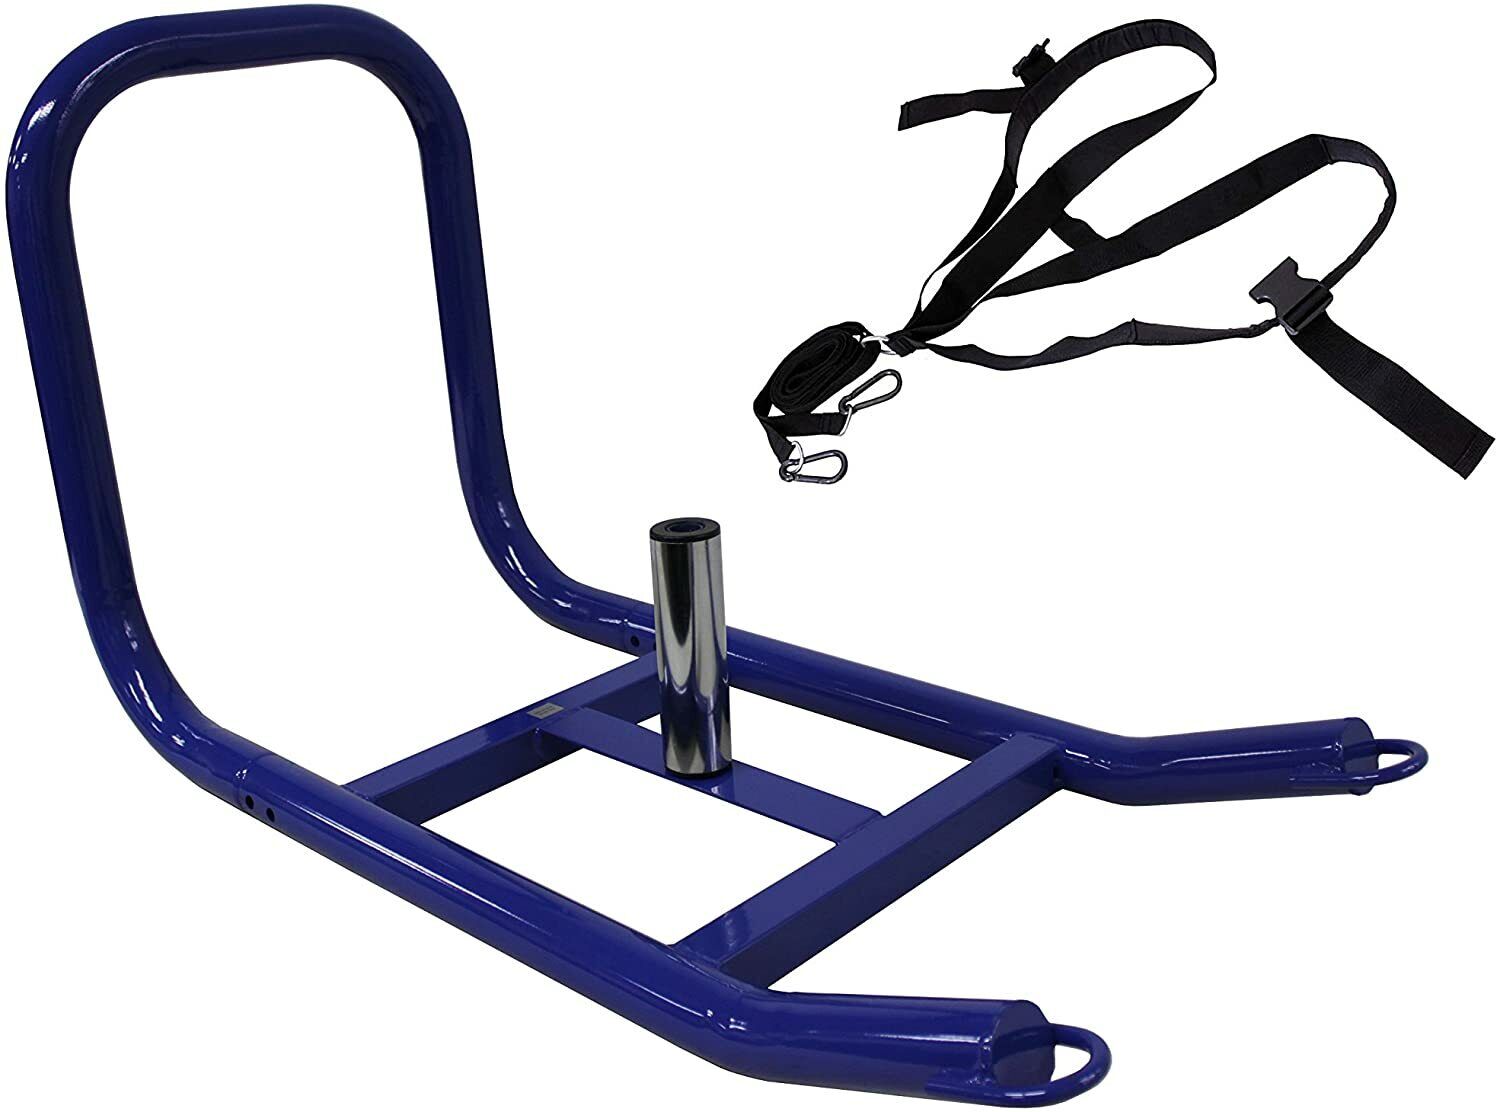 Ader Speed Sled Push Pull Training Sled with Harness & Straps Set ader Does Not Apply